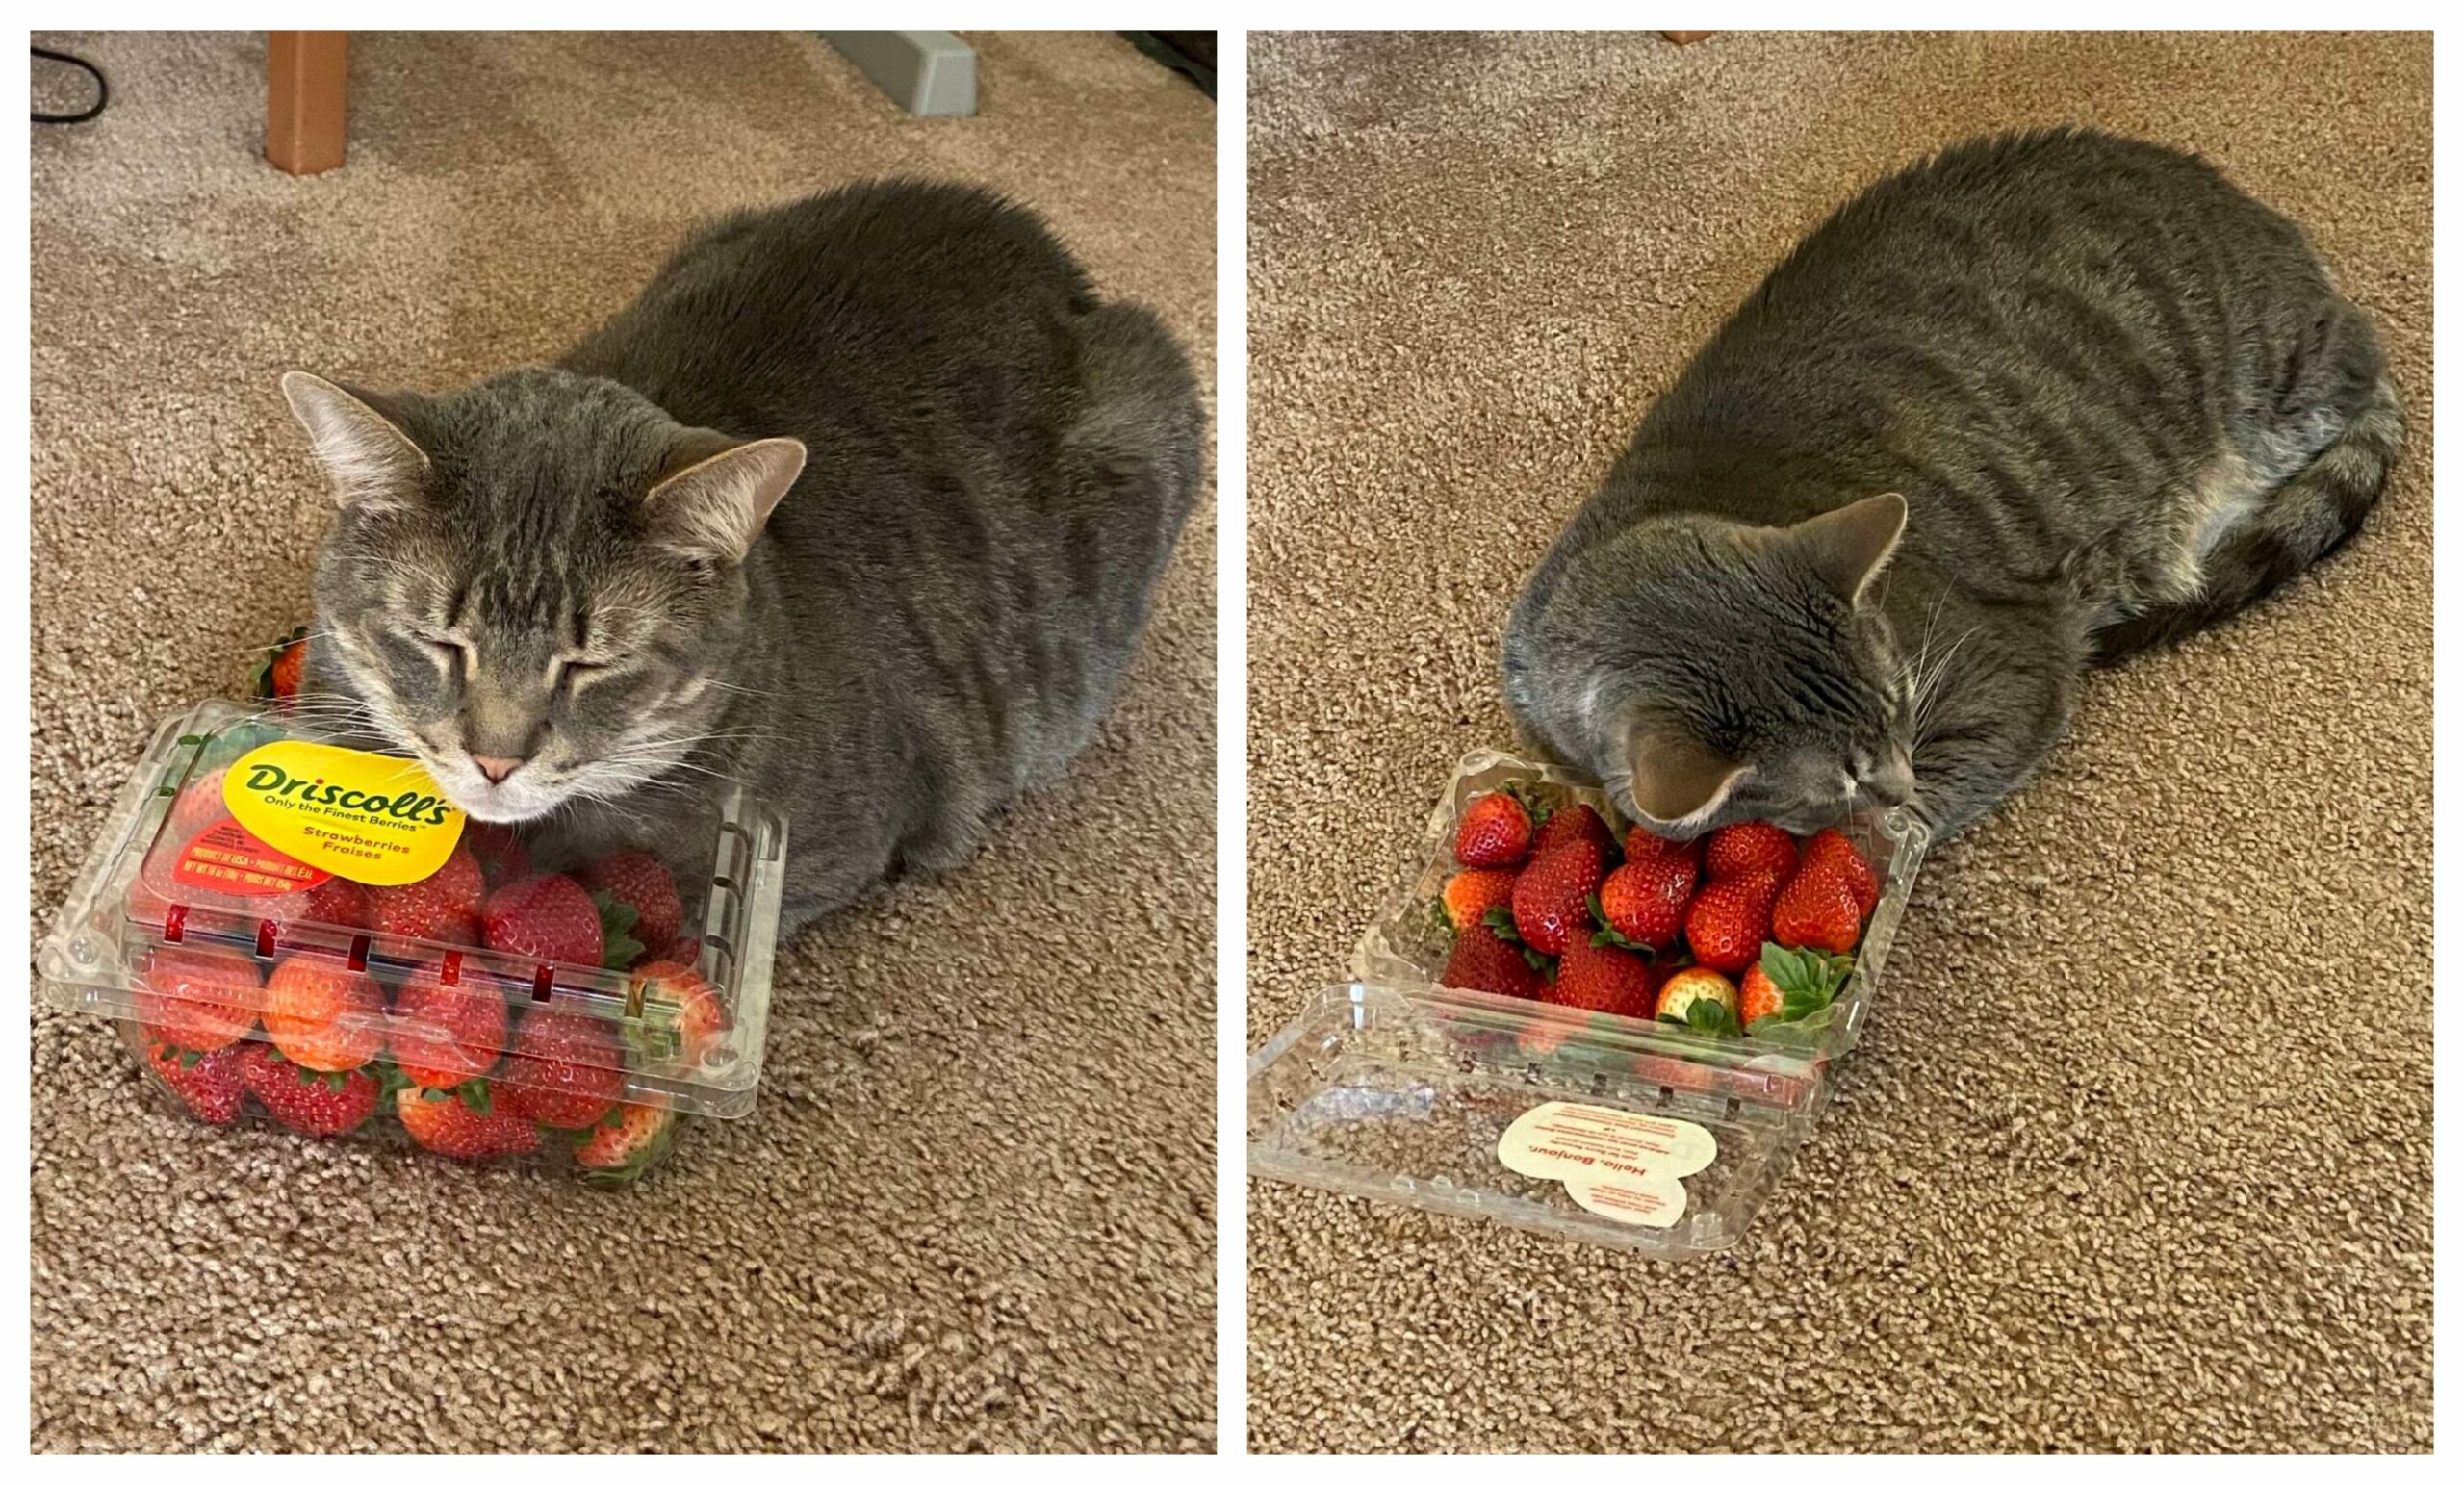 A Cat Favorite Comfort Is A Bunch Of Strawberries